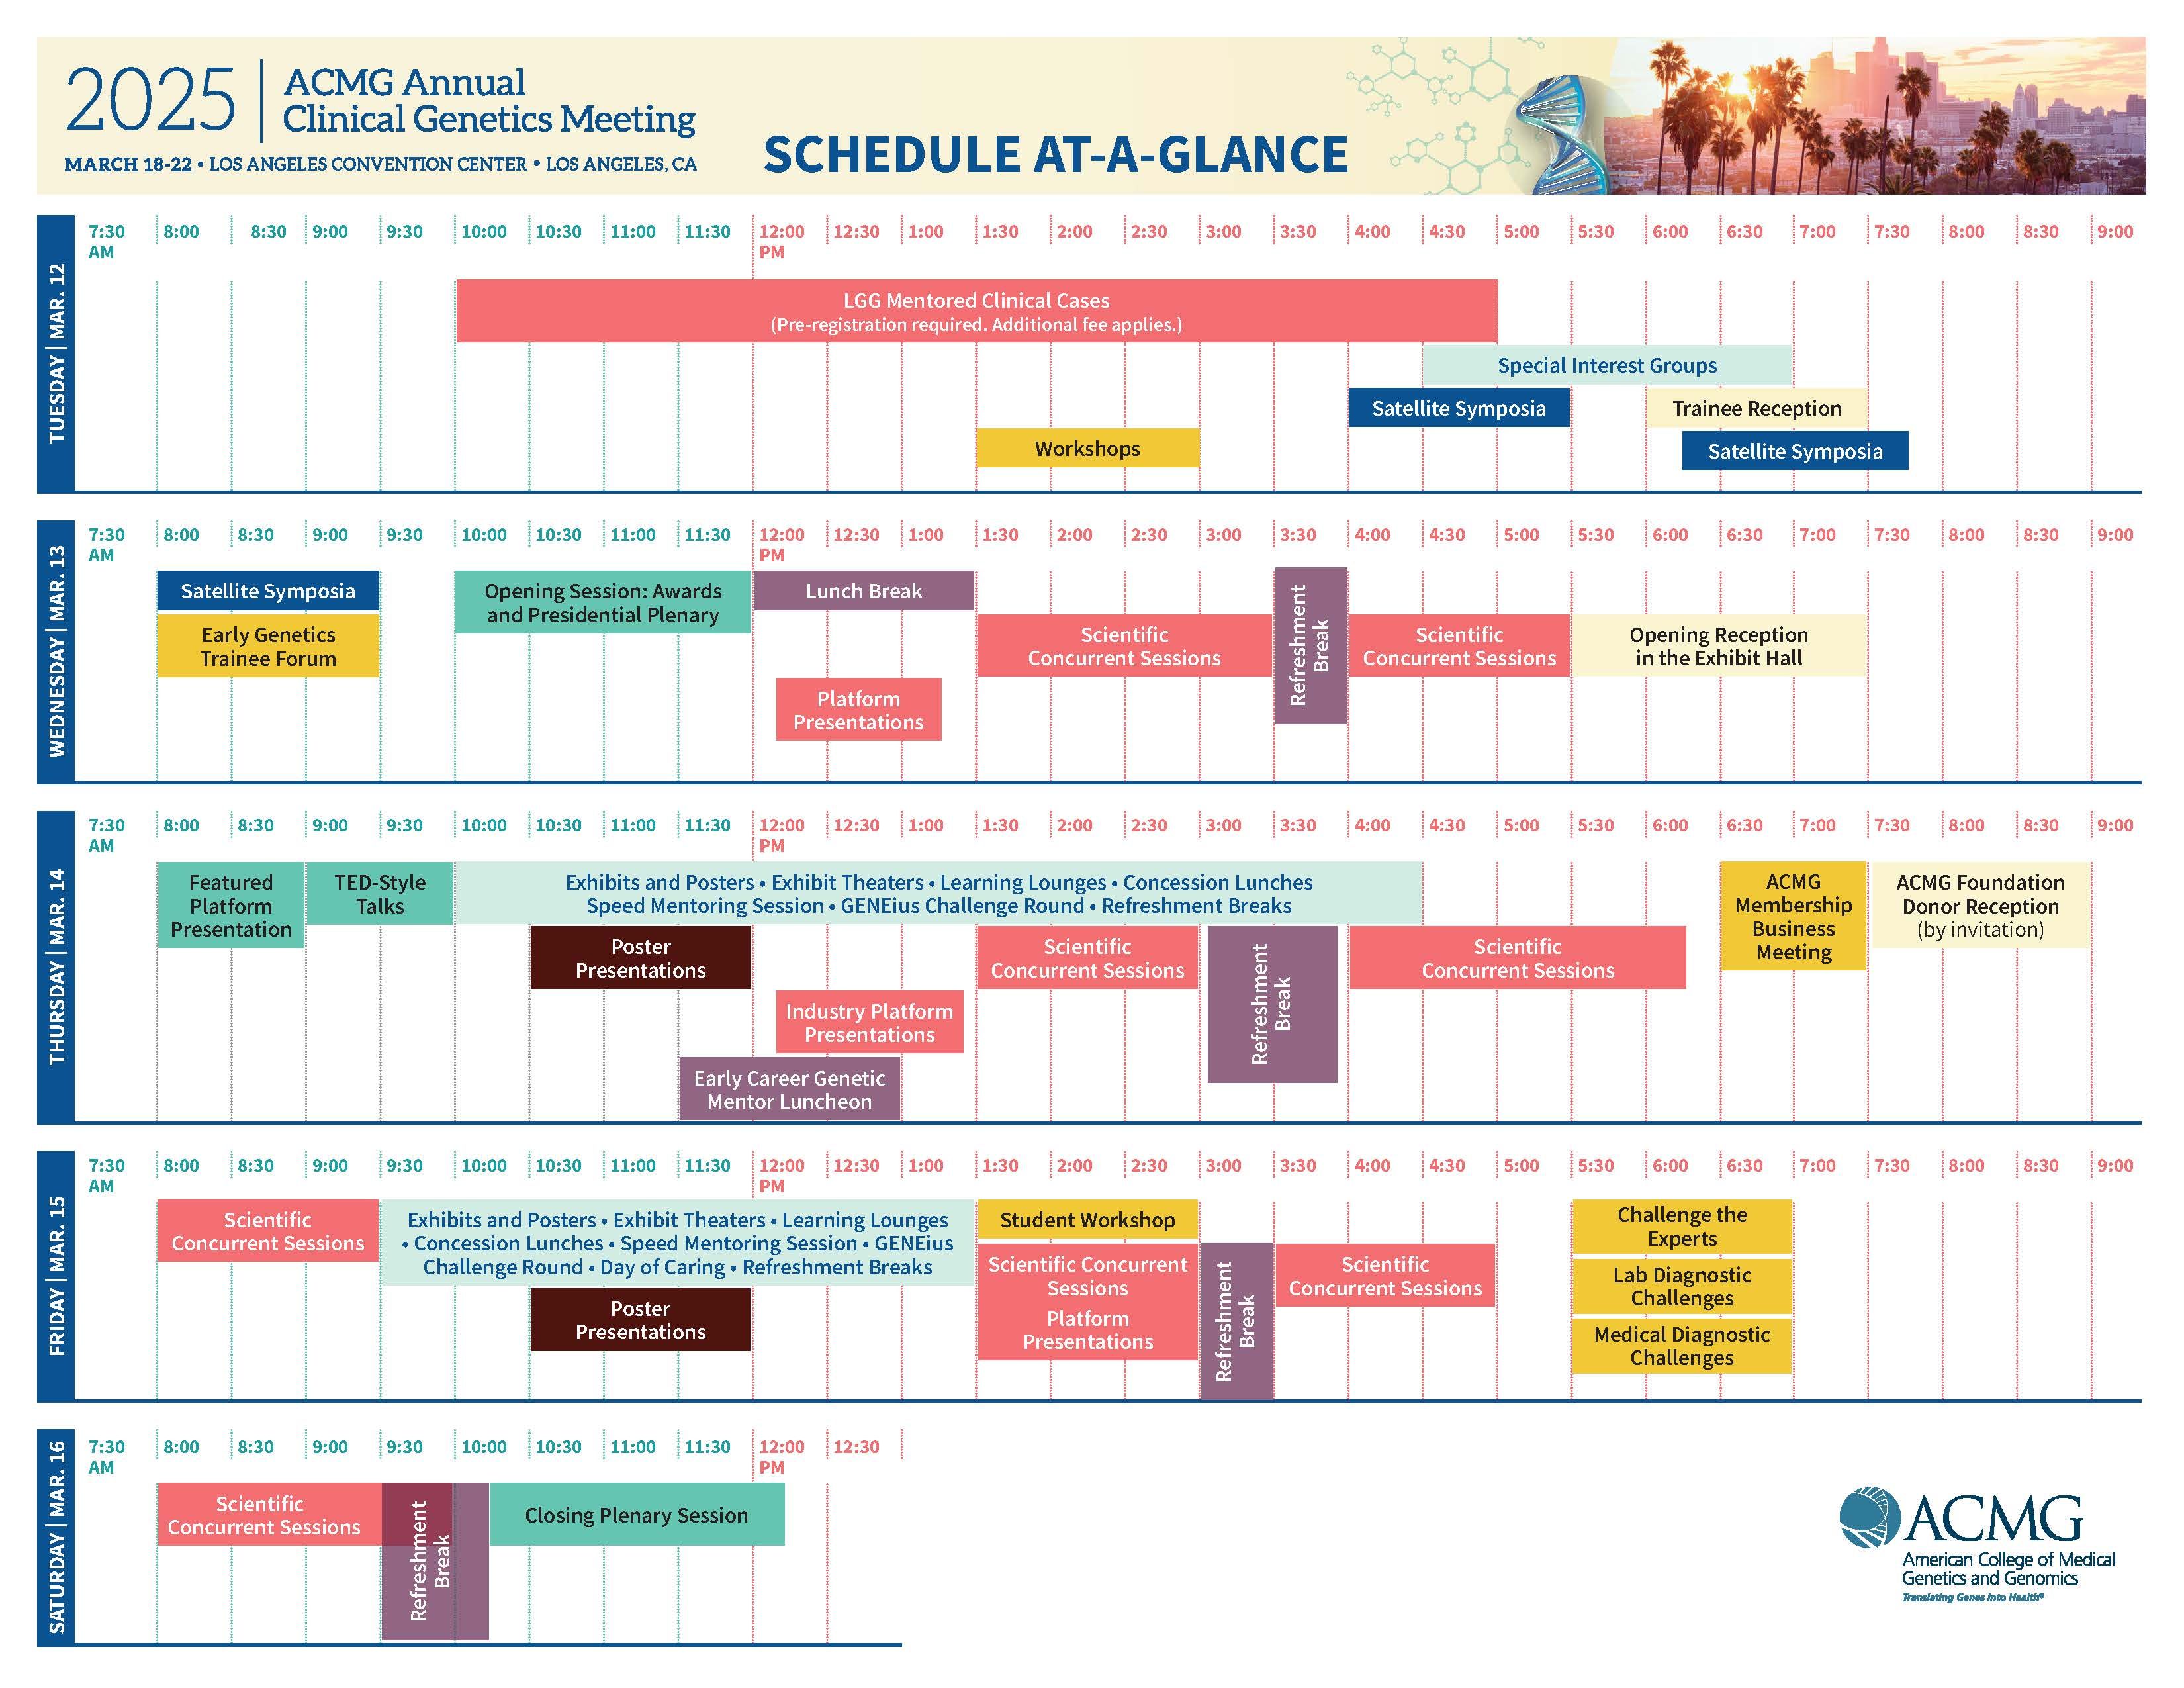 Schedule at a glance